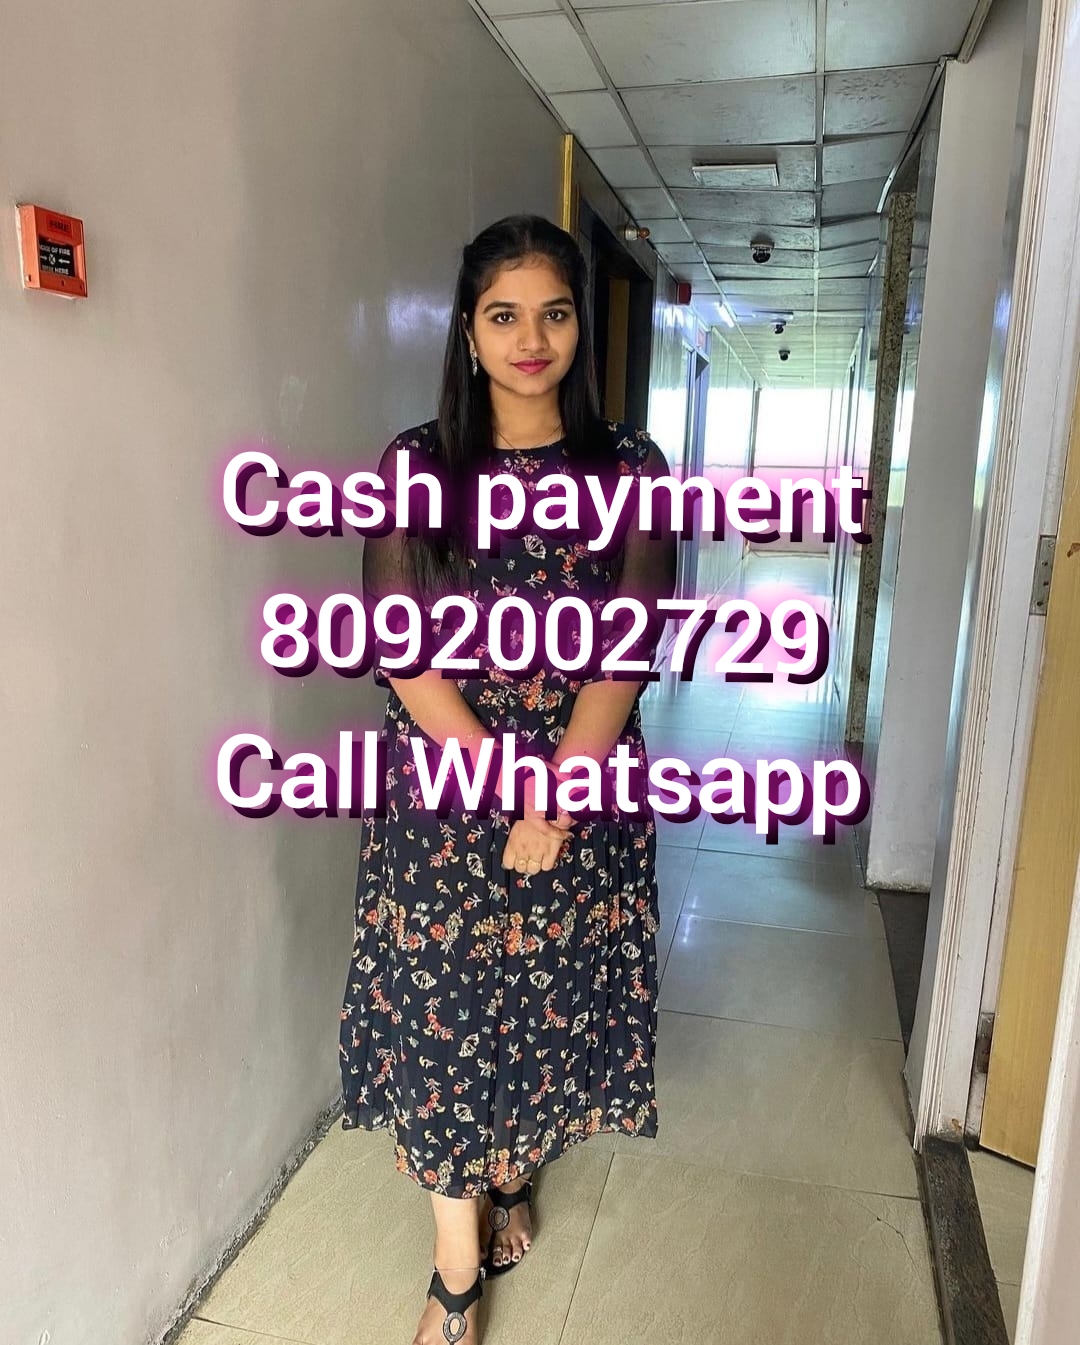 Anand full satisfied service anytime available